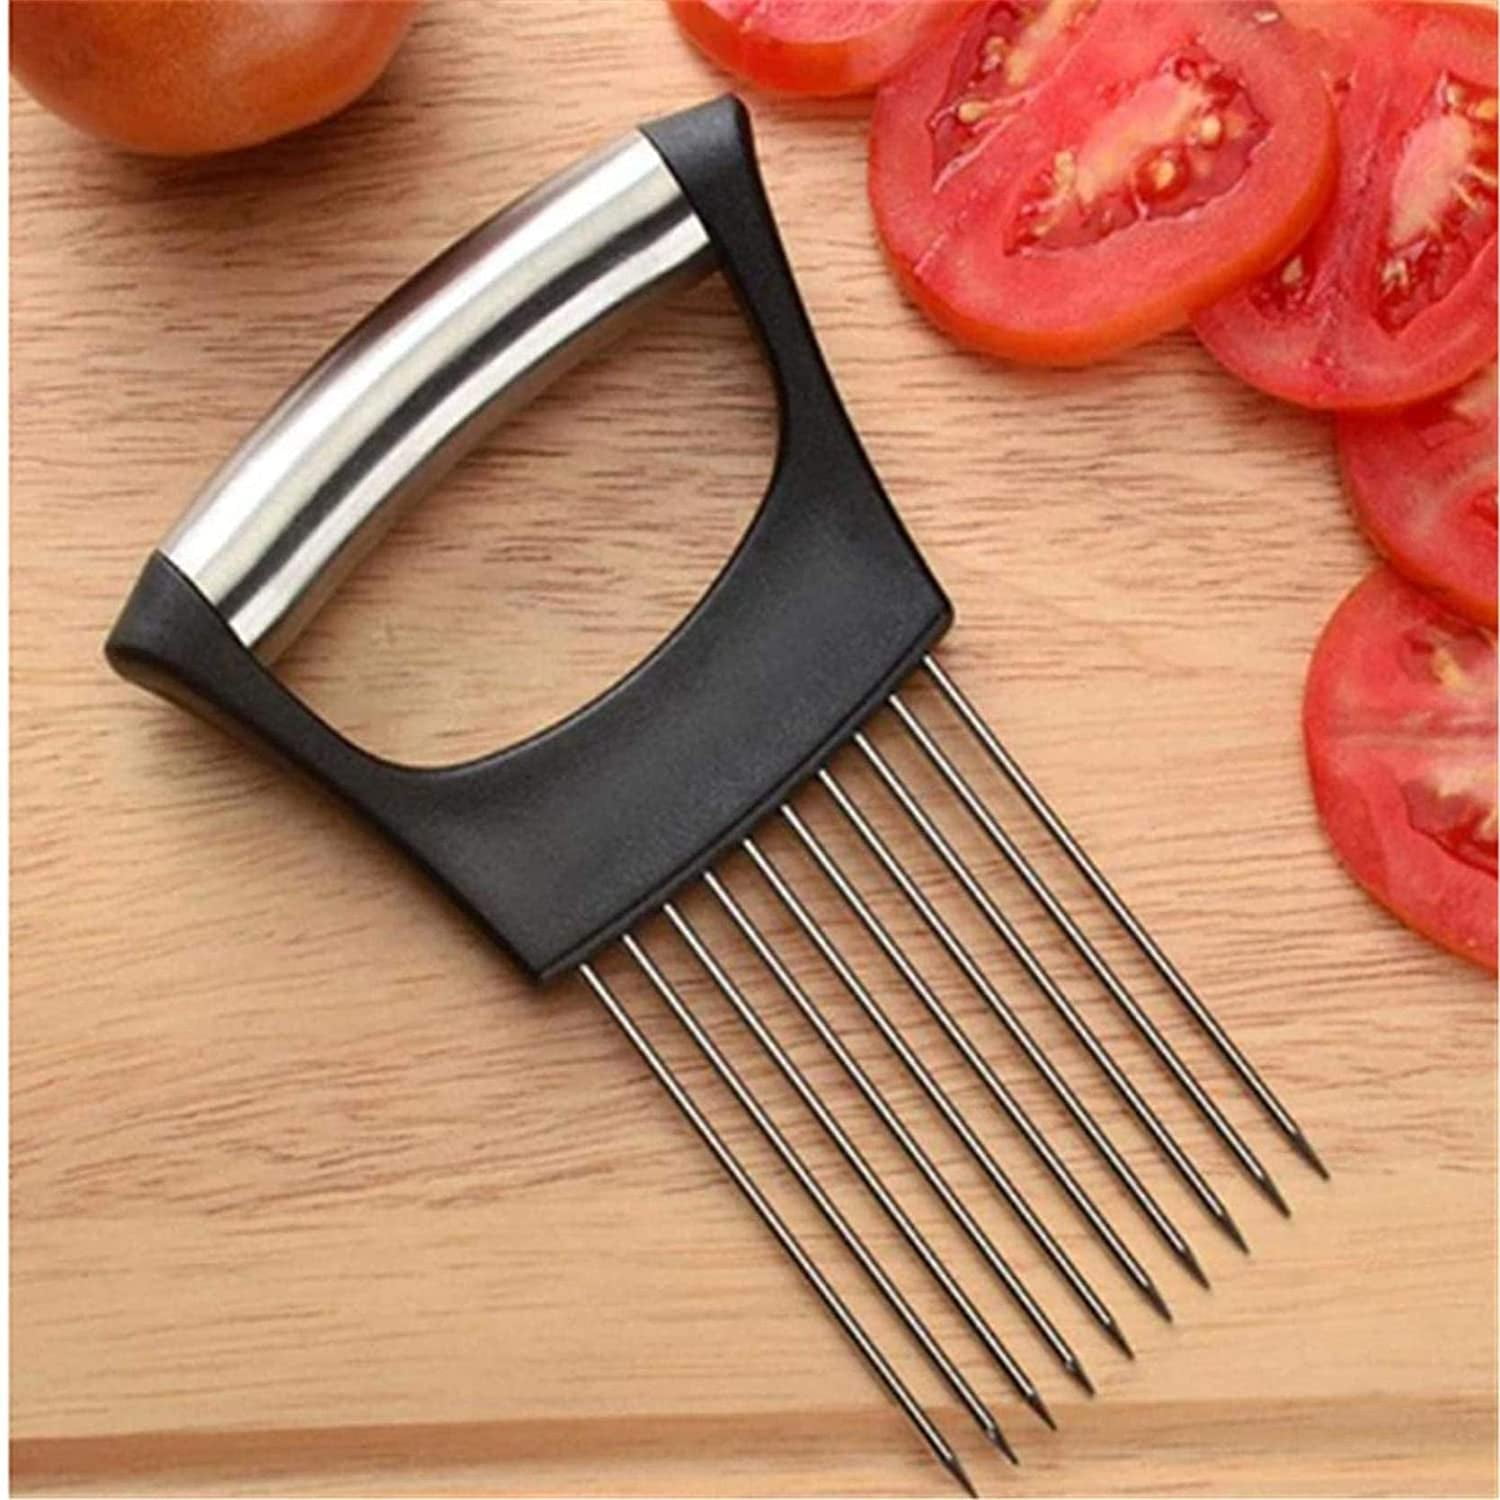 2Pcs Black Onion Cutting Tool Stainless Steel Onion Holder for Slicing,Food Slice Assistant Onion Holder Slicer,Assistant Slicers Stainless Steel Vegetable Rack Slicers Meat Slicers Onion Holder 